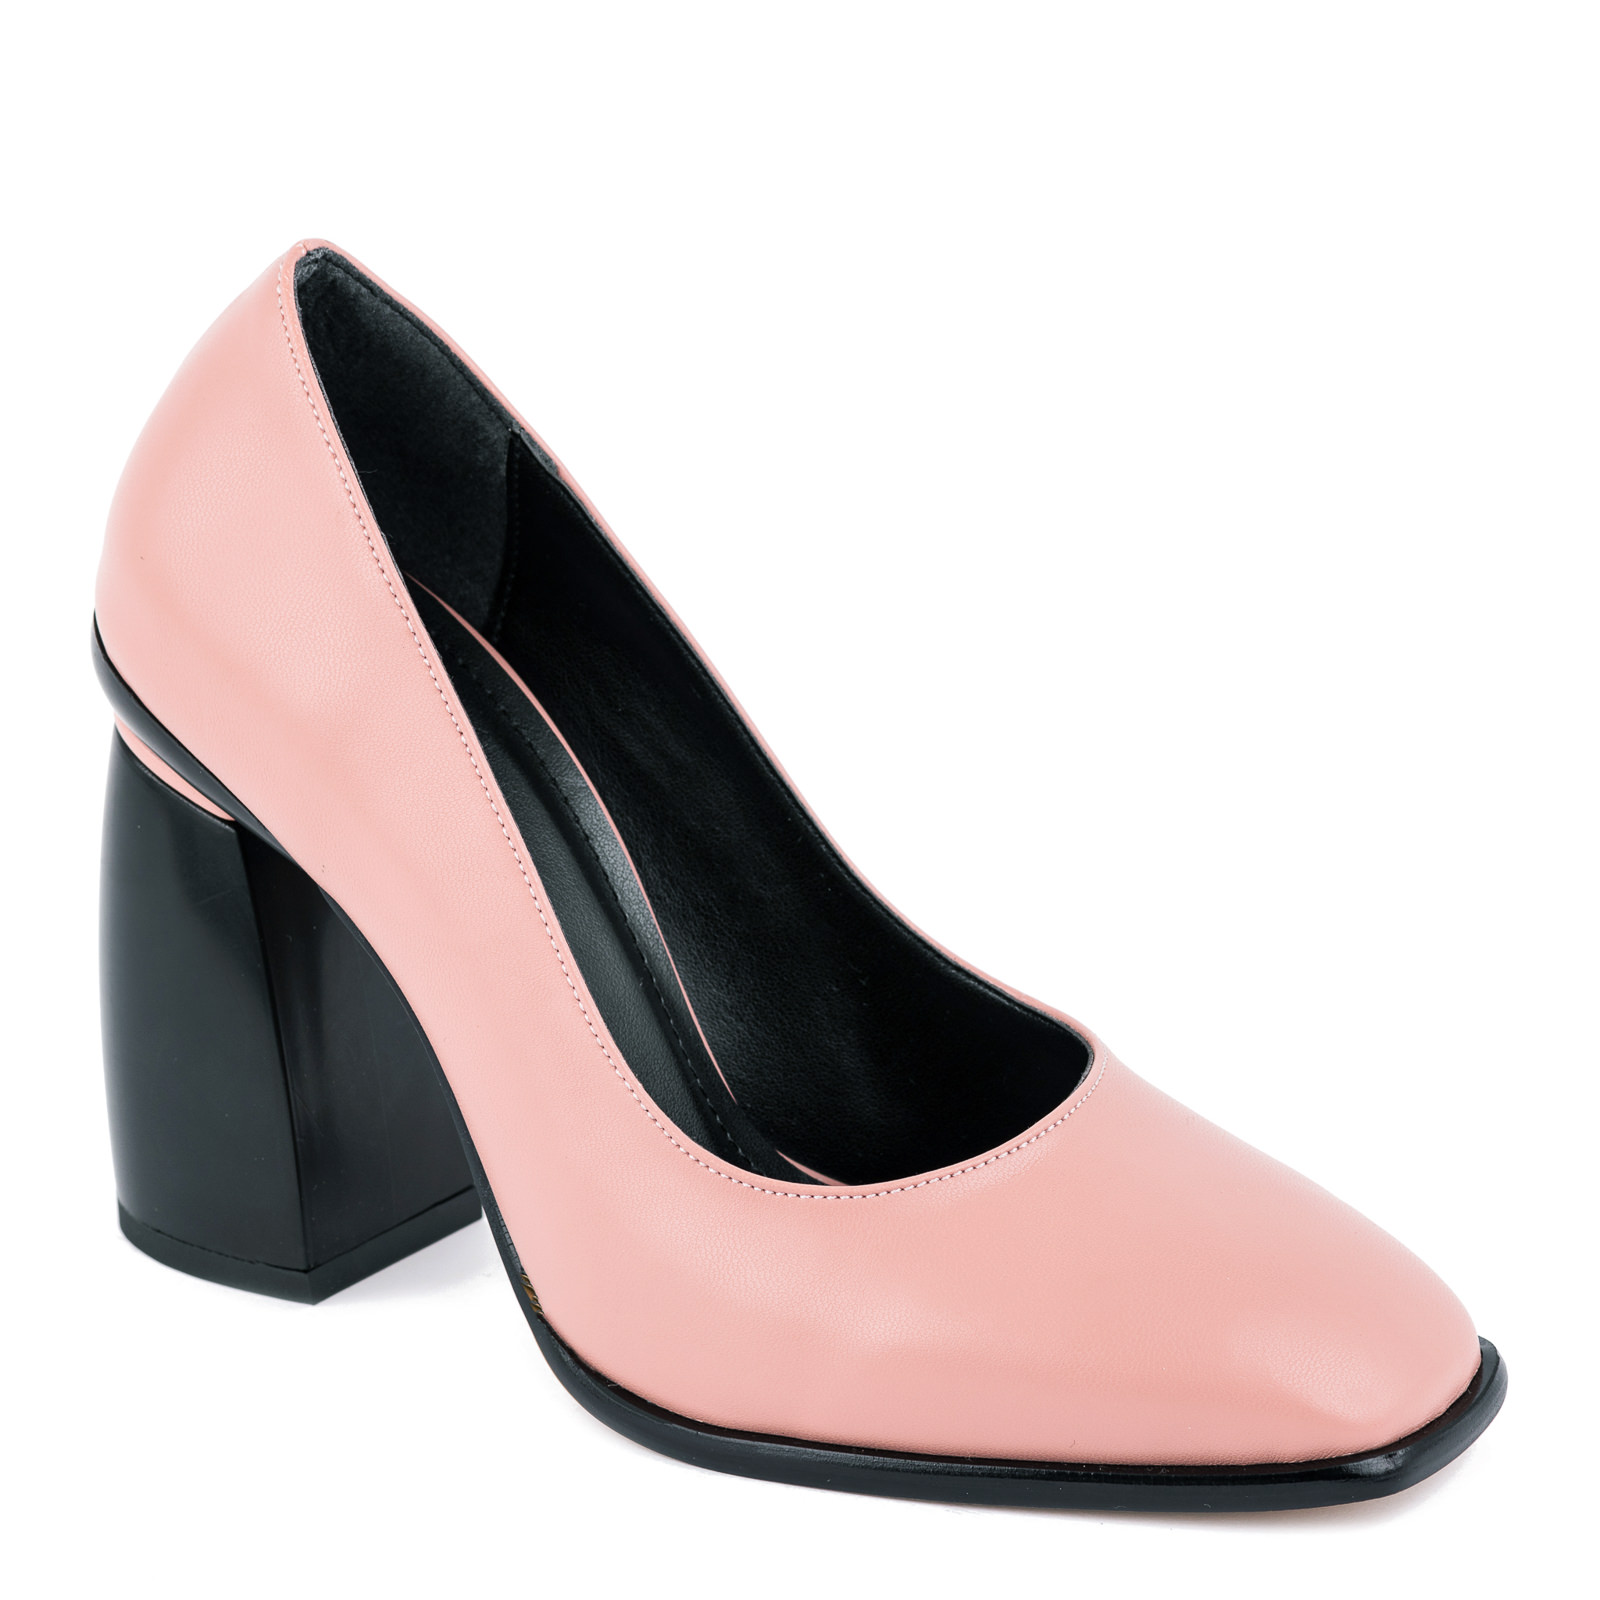 STILETTO SHOES WITH THICK HEEL - ROSE/BLACK